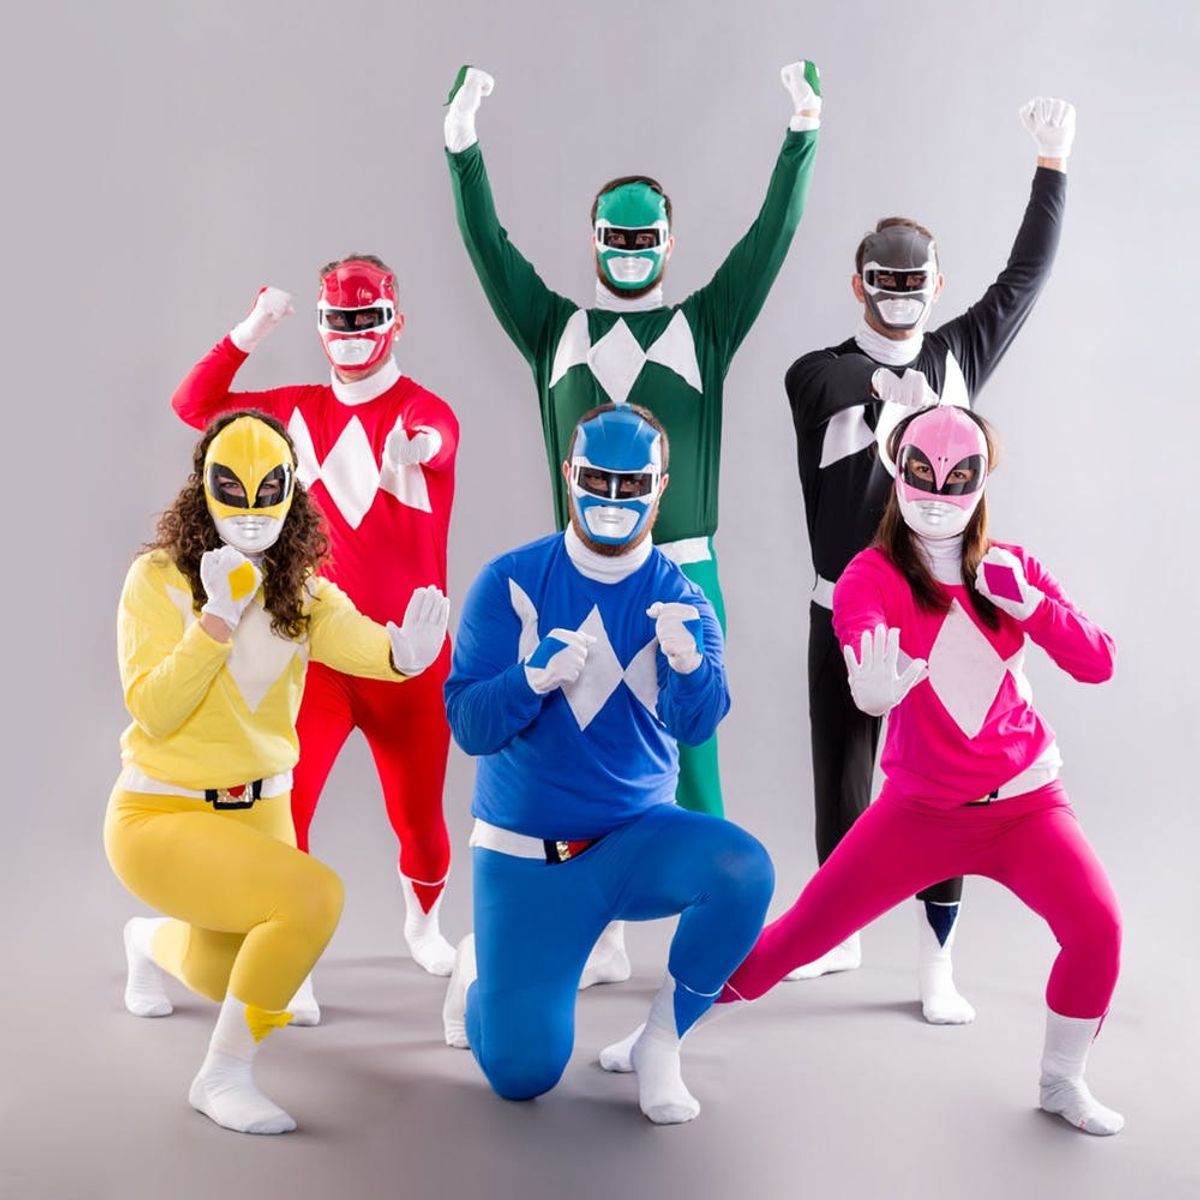 Grab Your Squad and DIY This Classic ’90s Power Rangers Costume